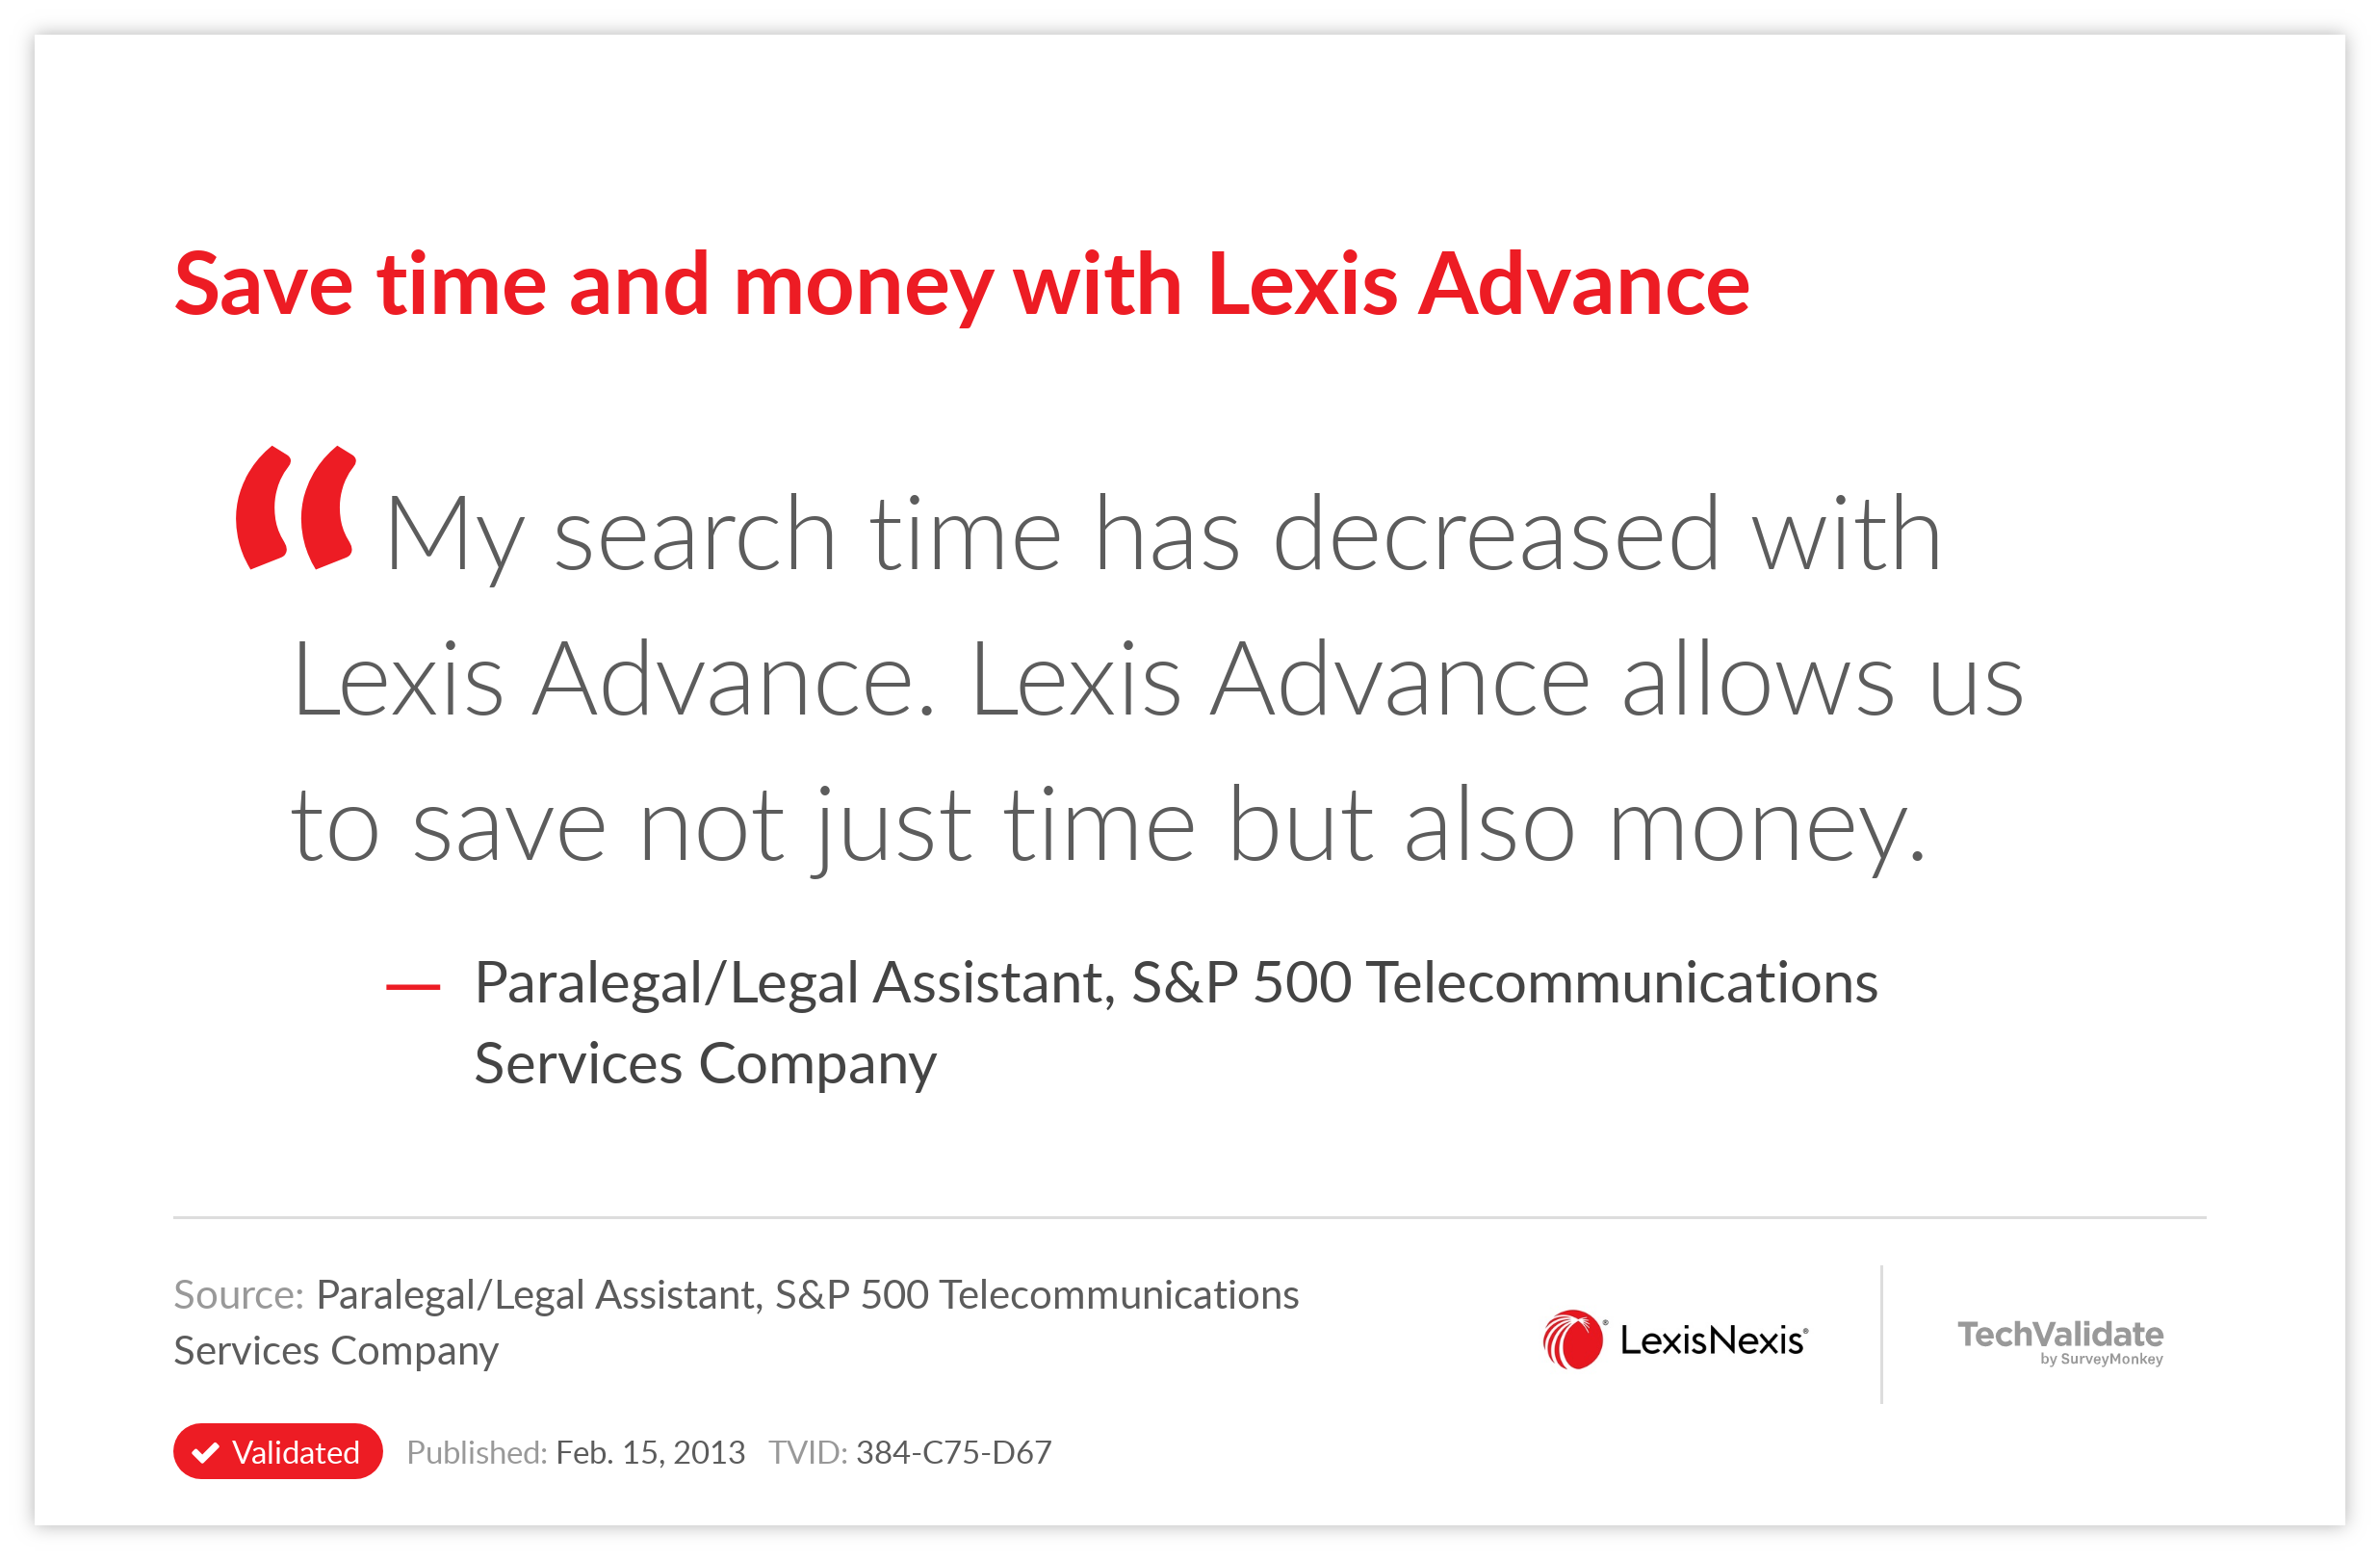 Save time and money with Lexis Advance